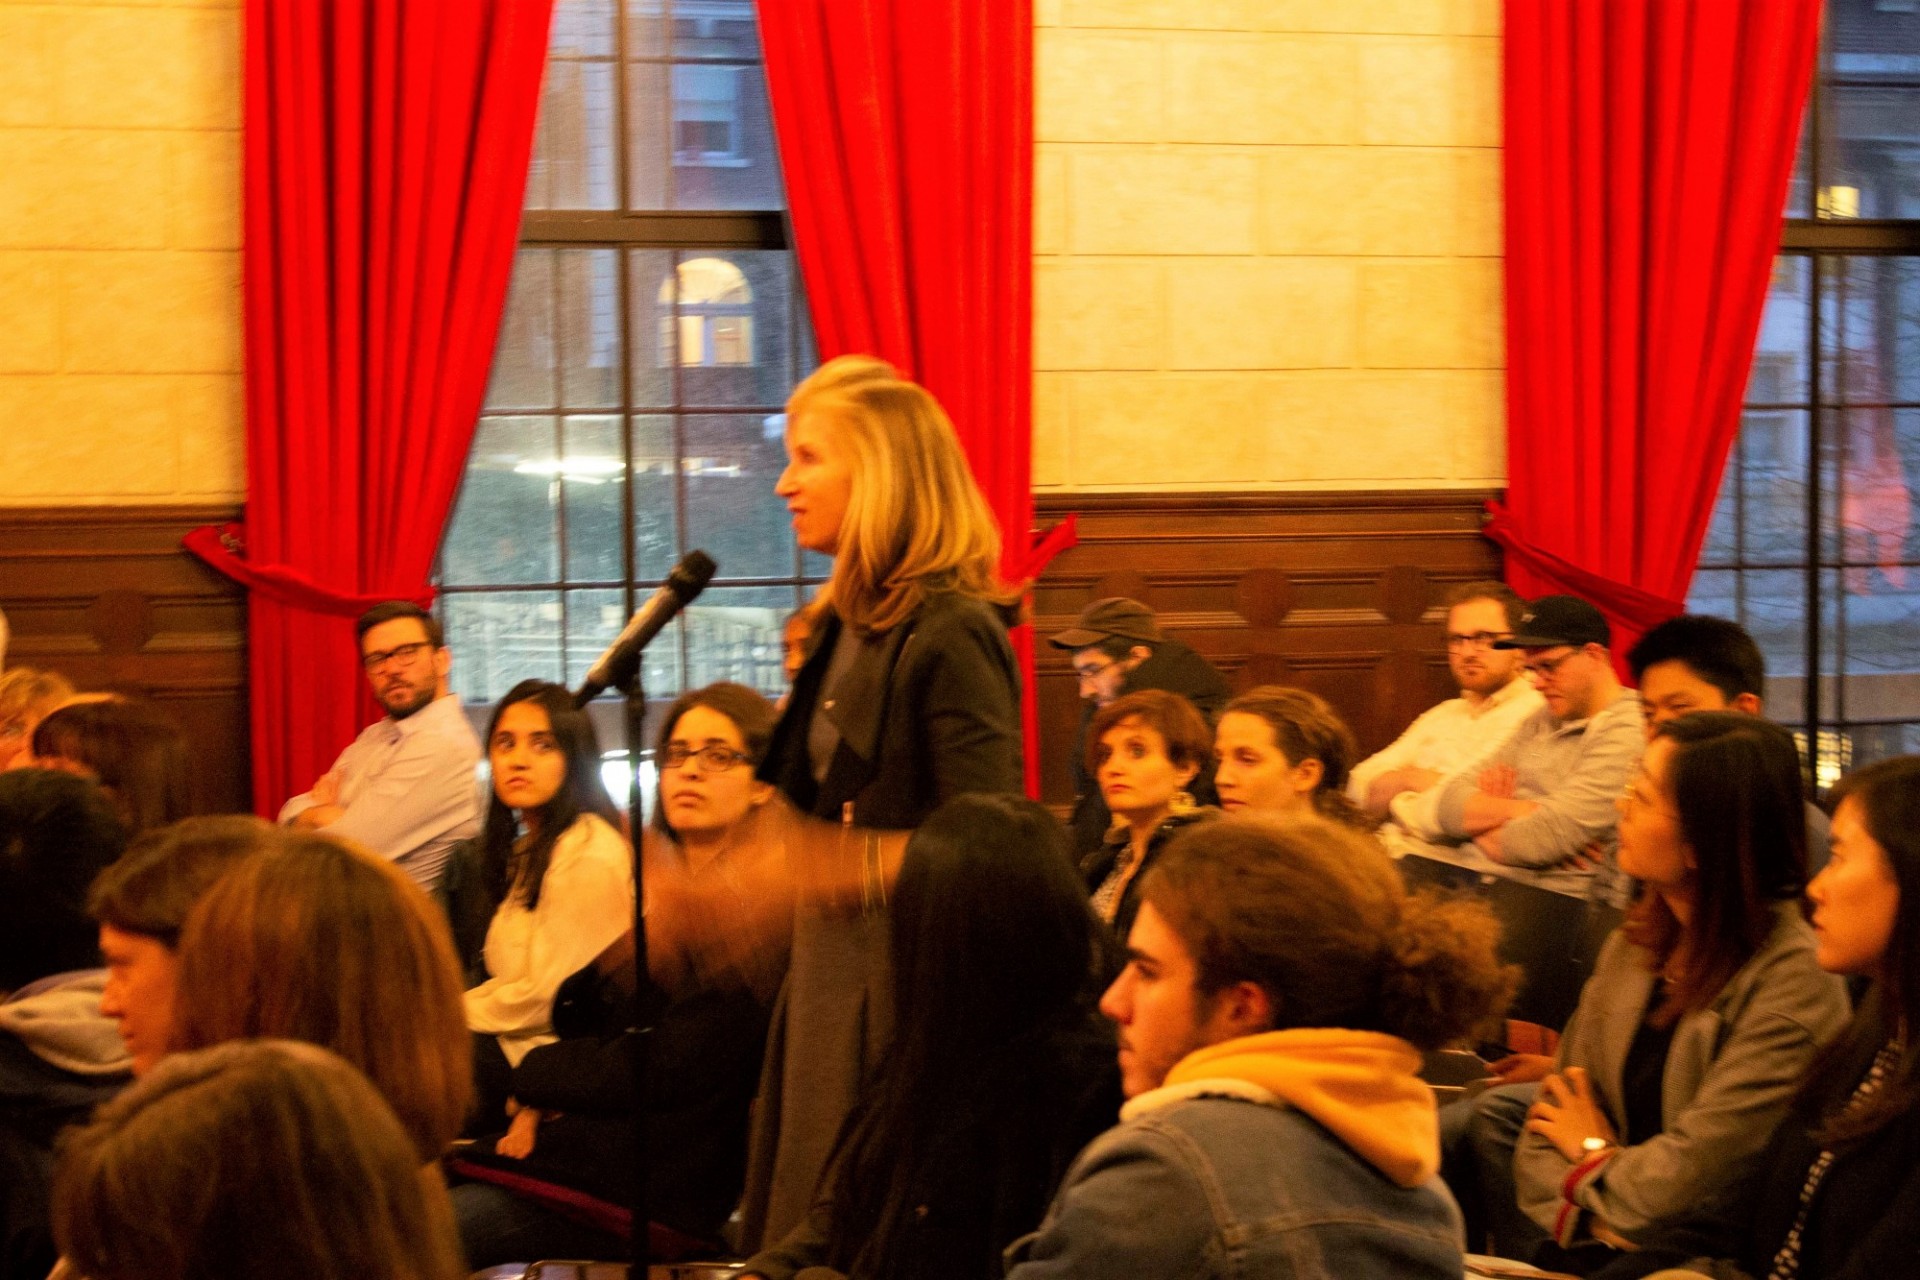 Columbia University students line up to ask the panelists questions during the question and answer session.